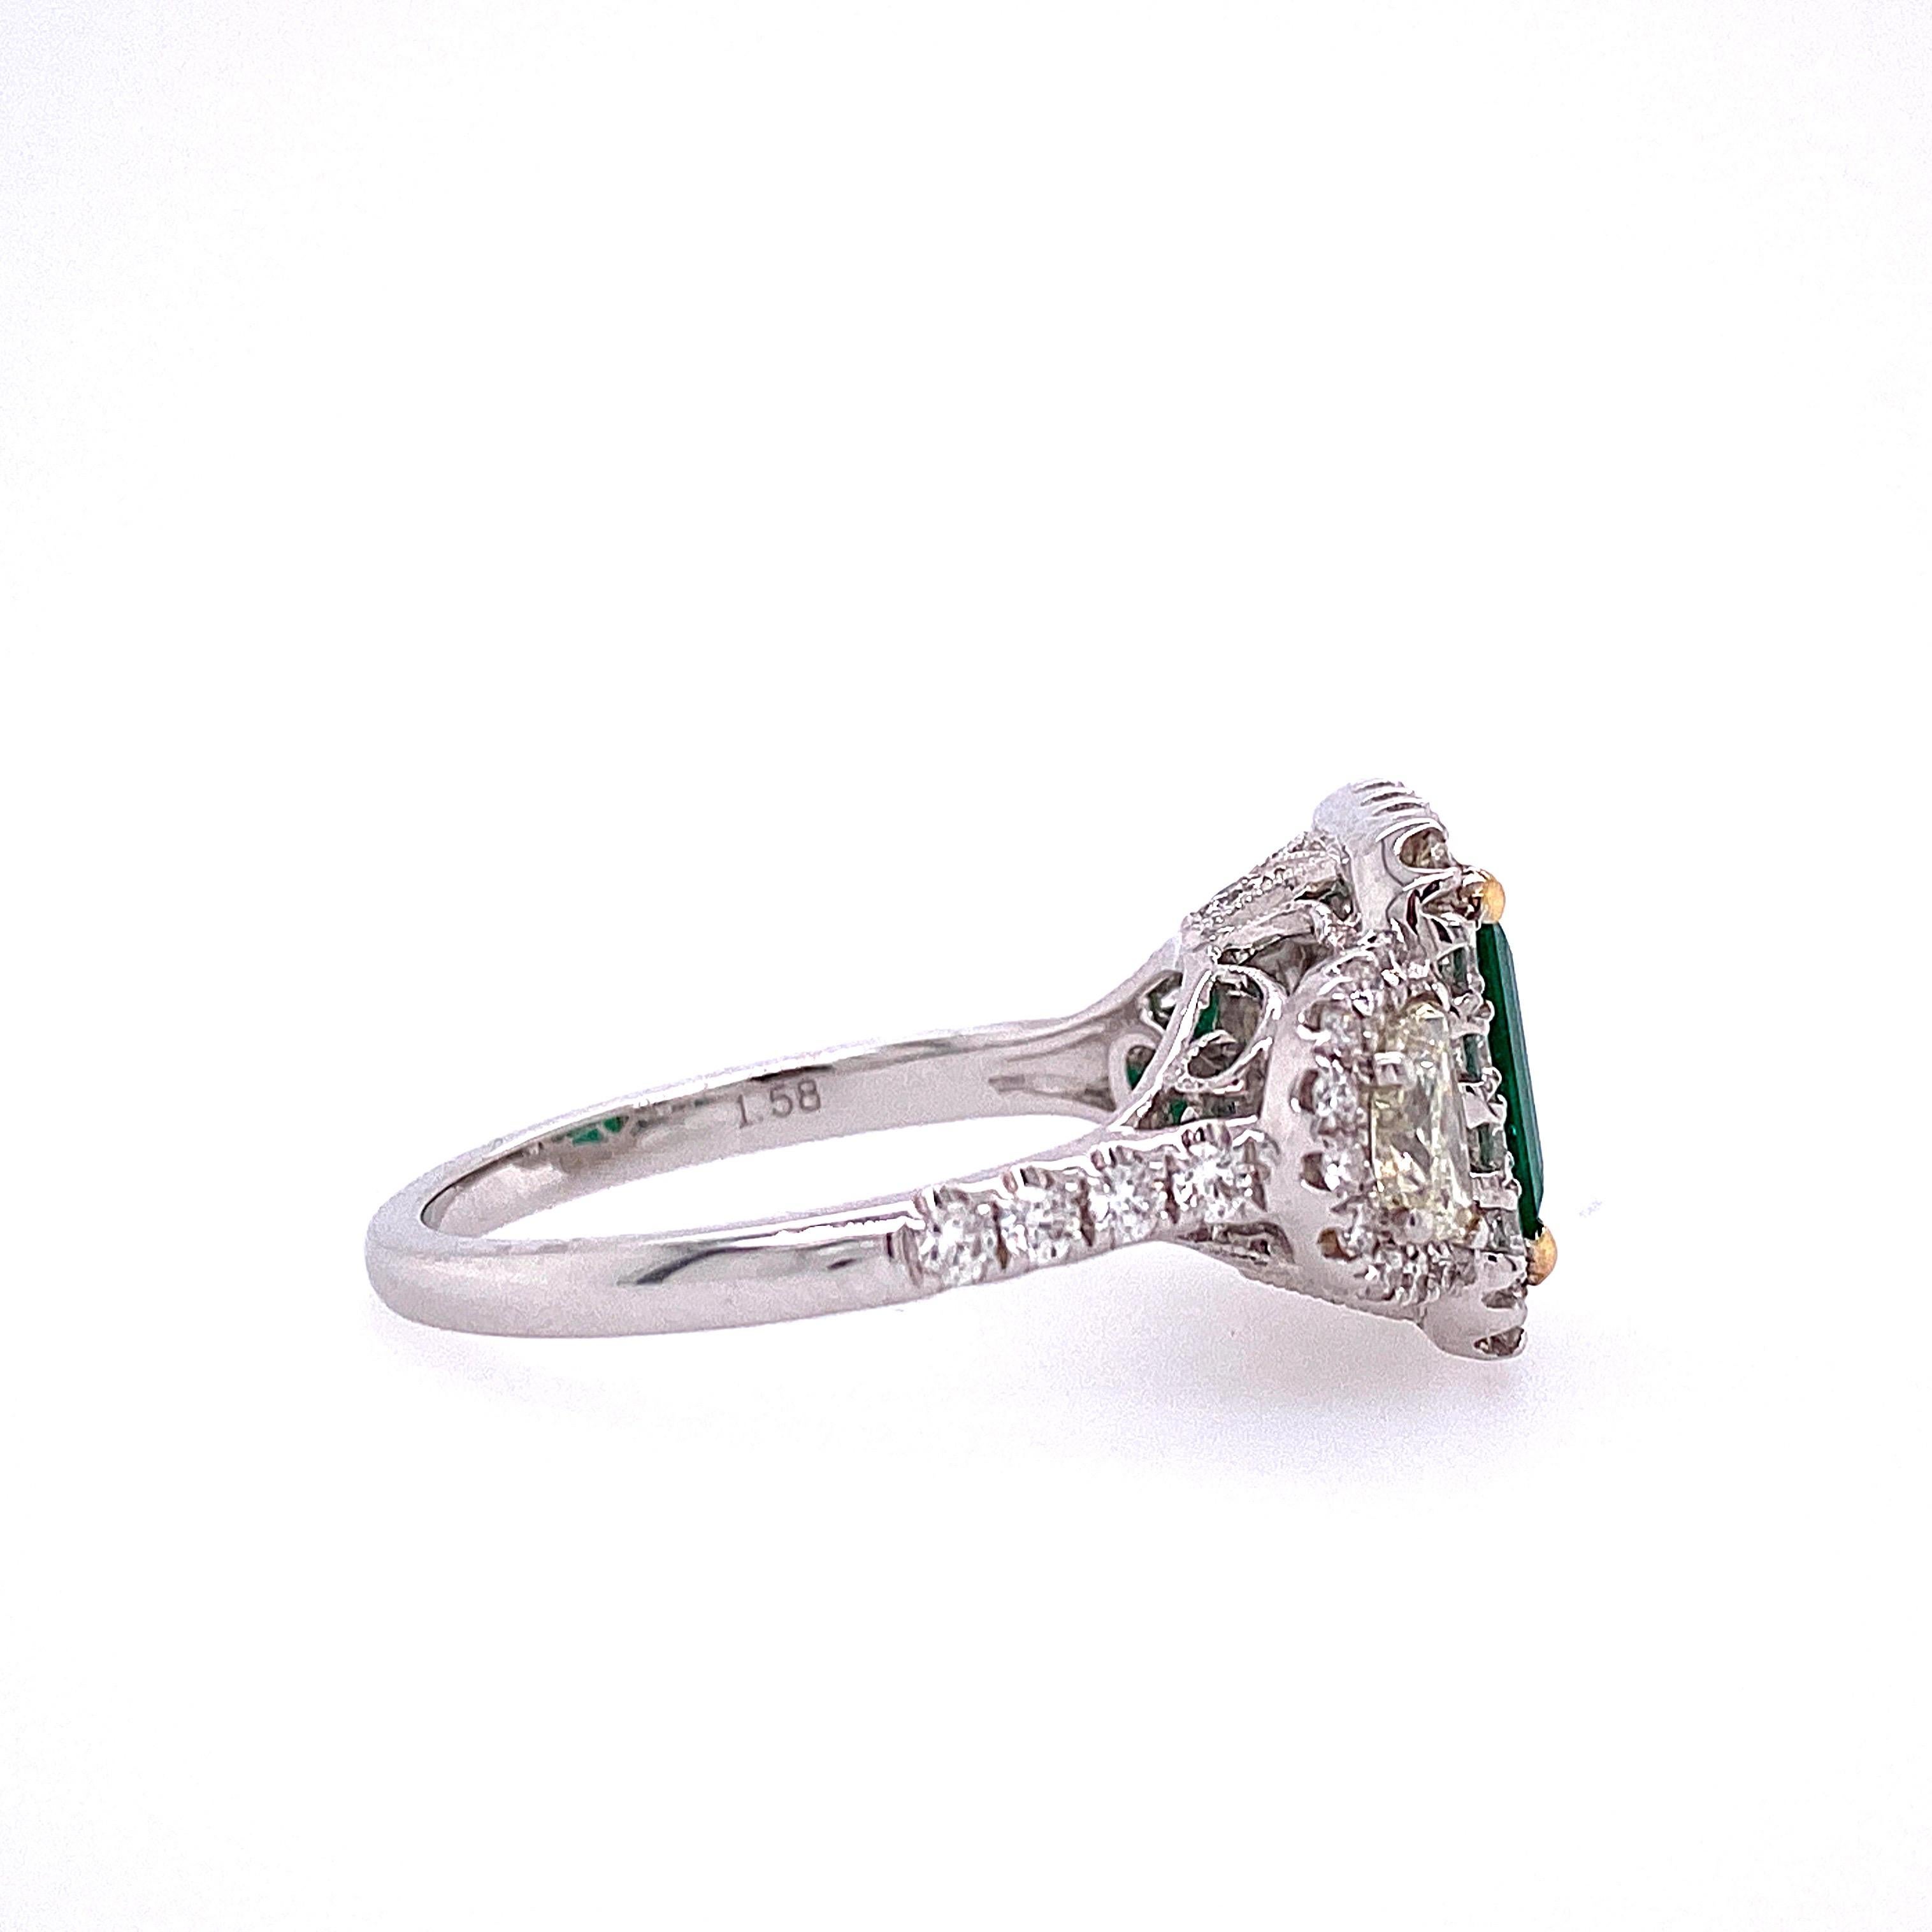 Women's 1.58 Carat Emerald and Diamond Cocktail Ring For Sale